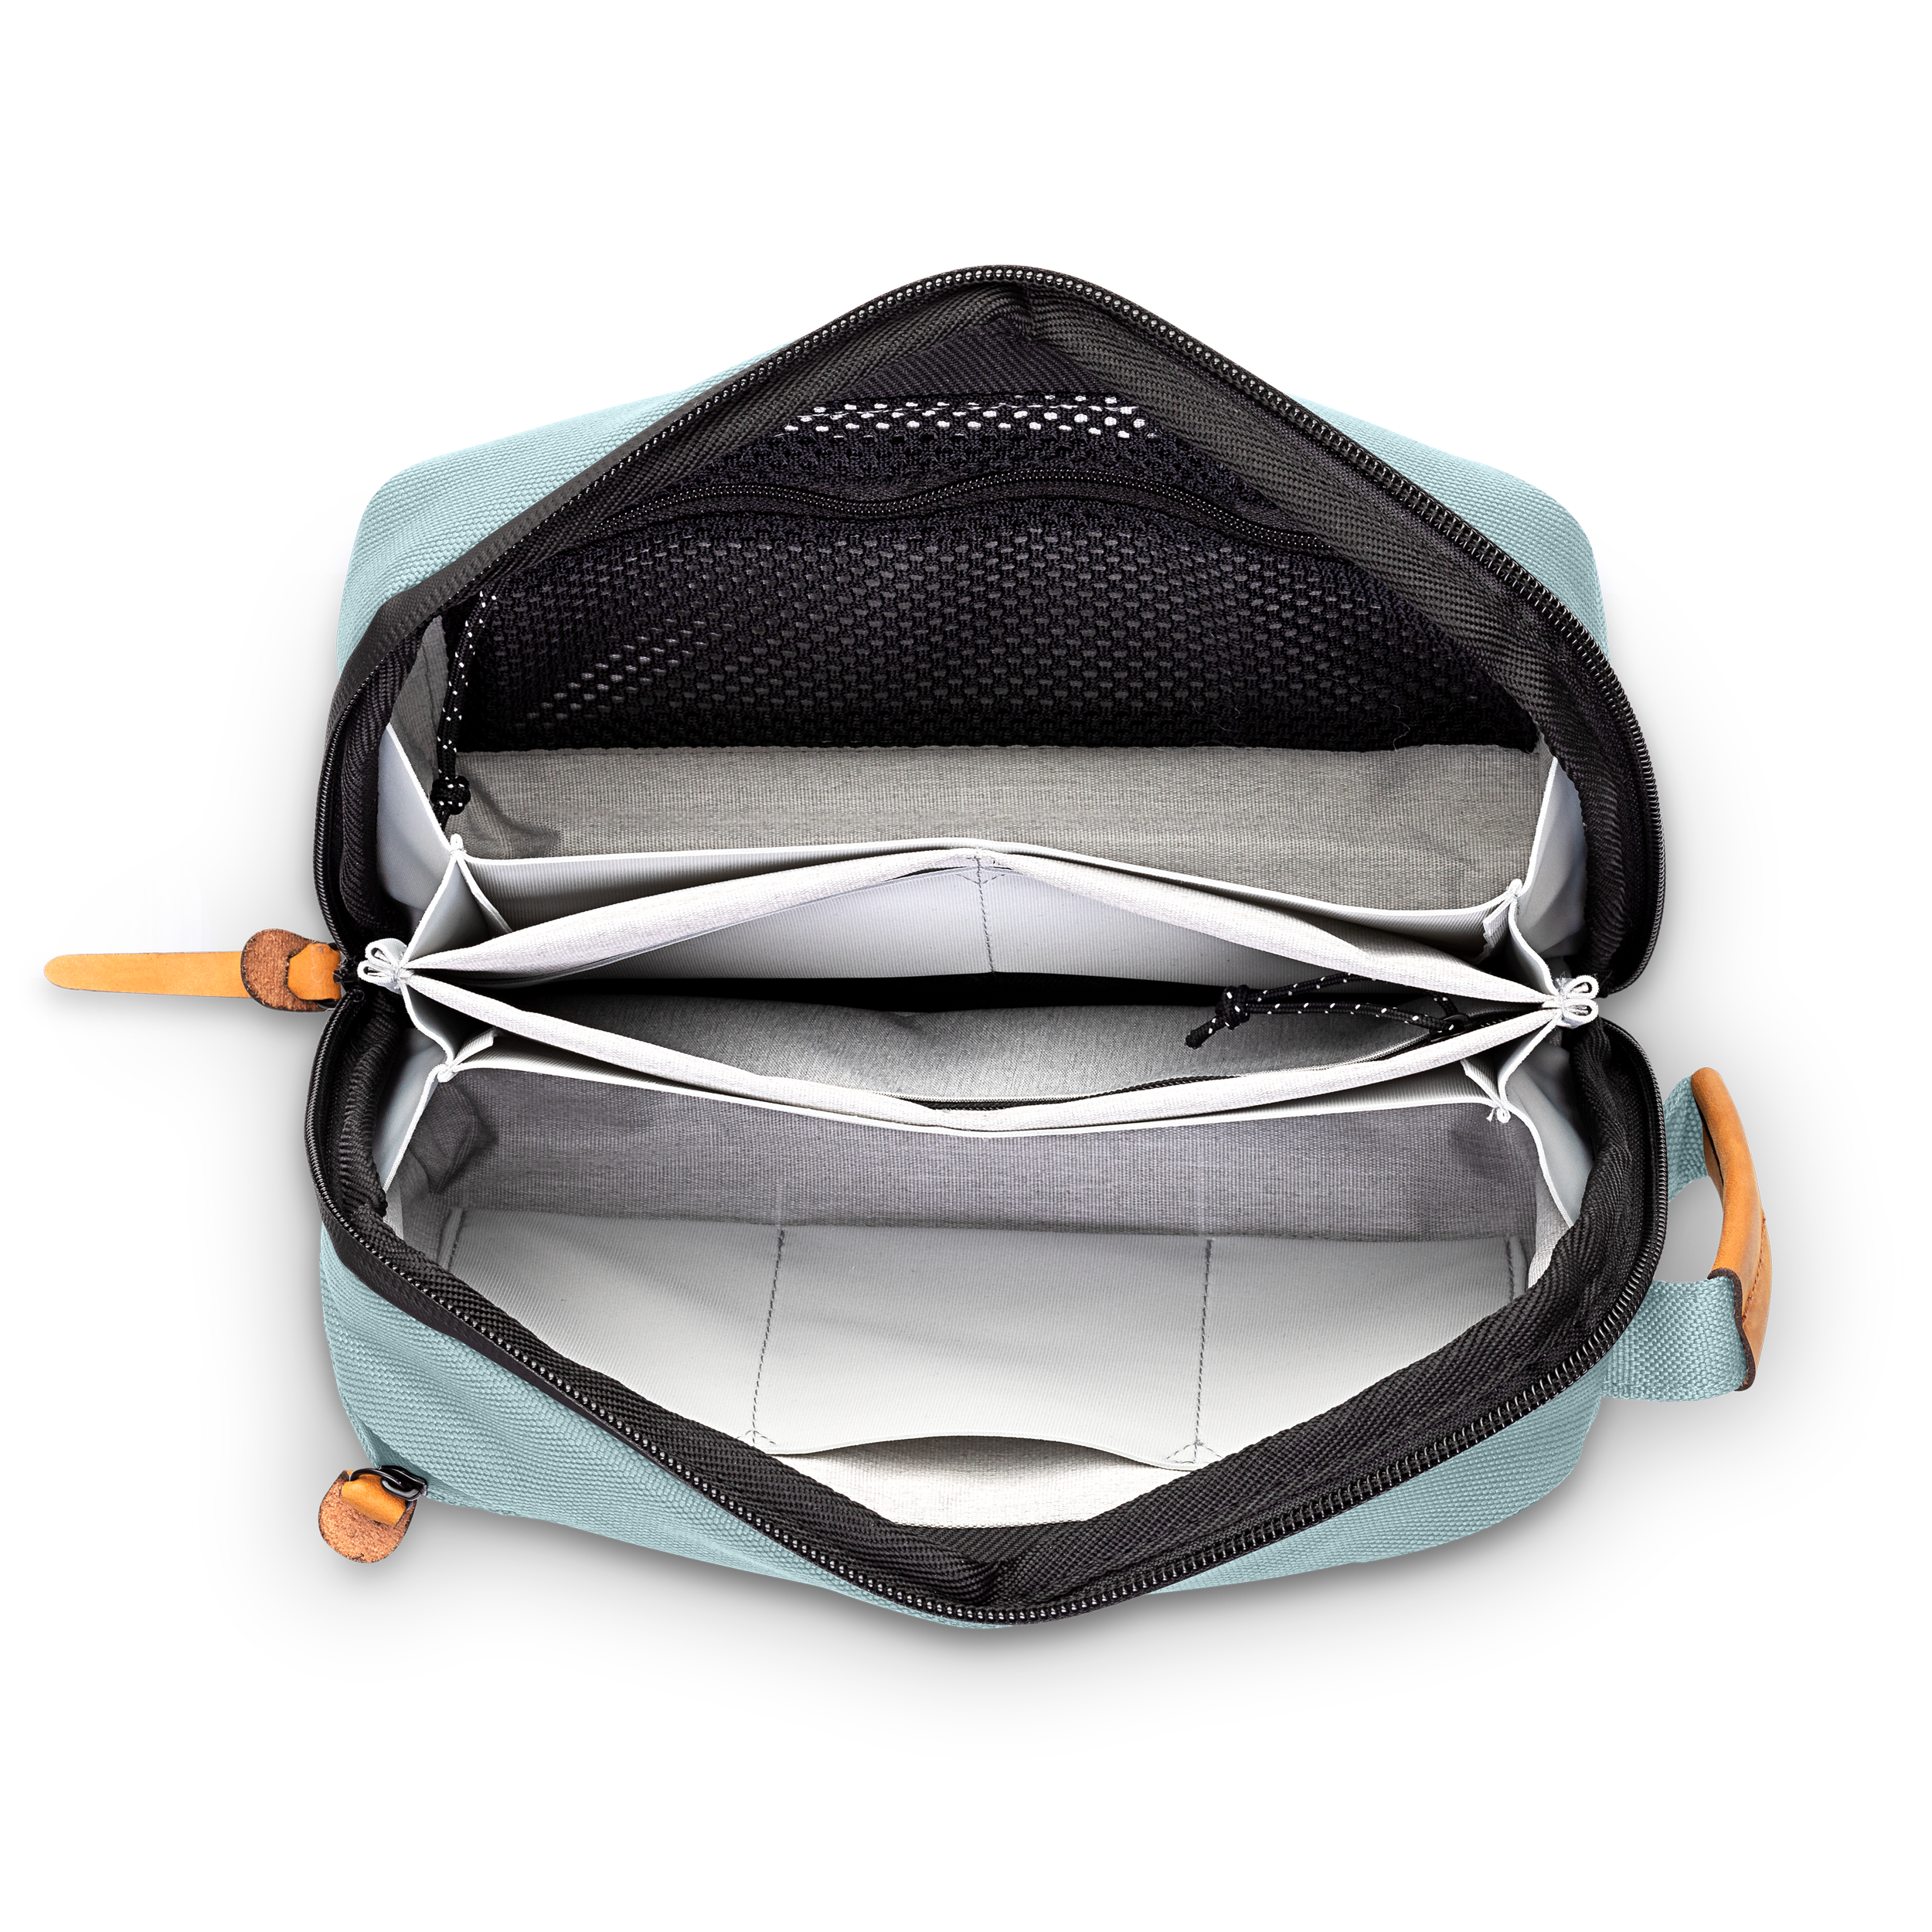 Image 1 - Teal Empty Bag Top Down.png